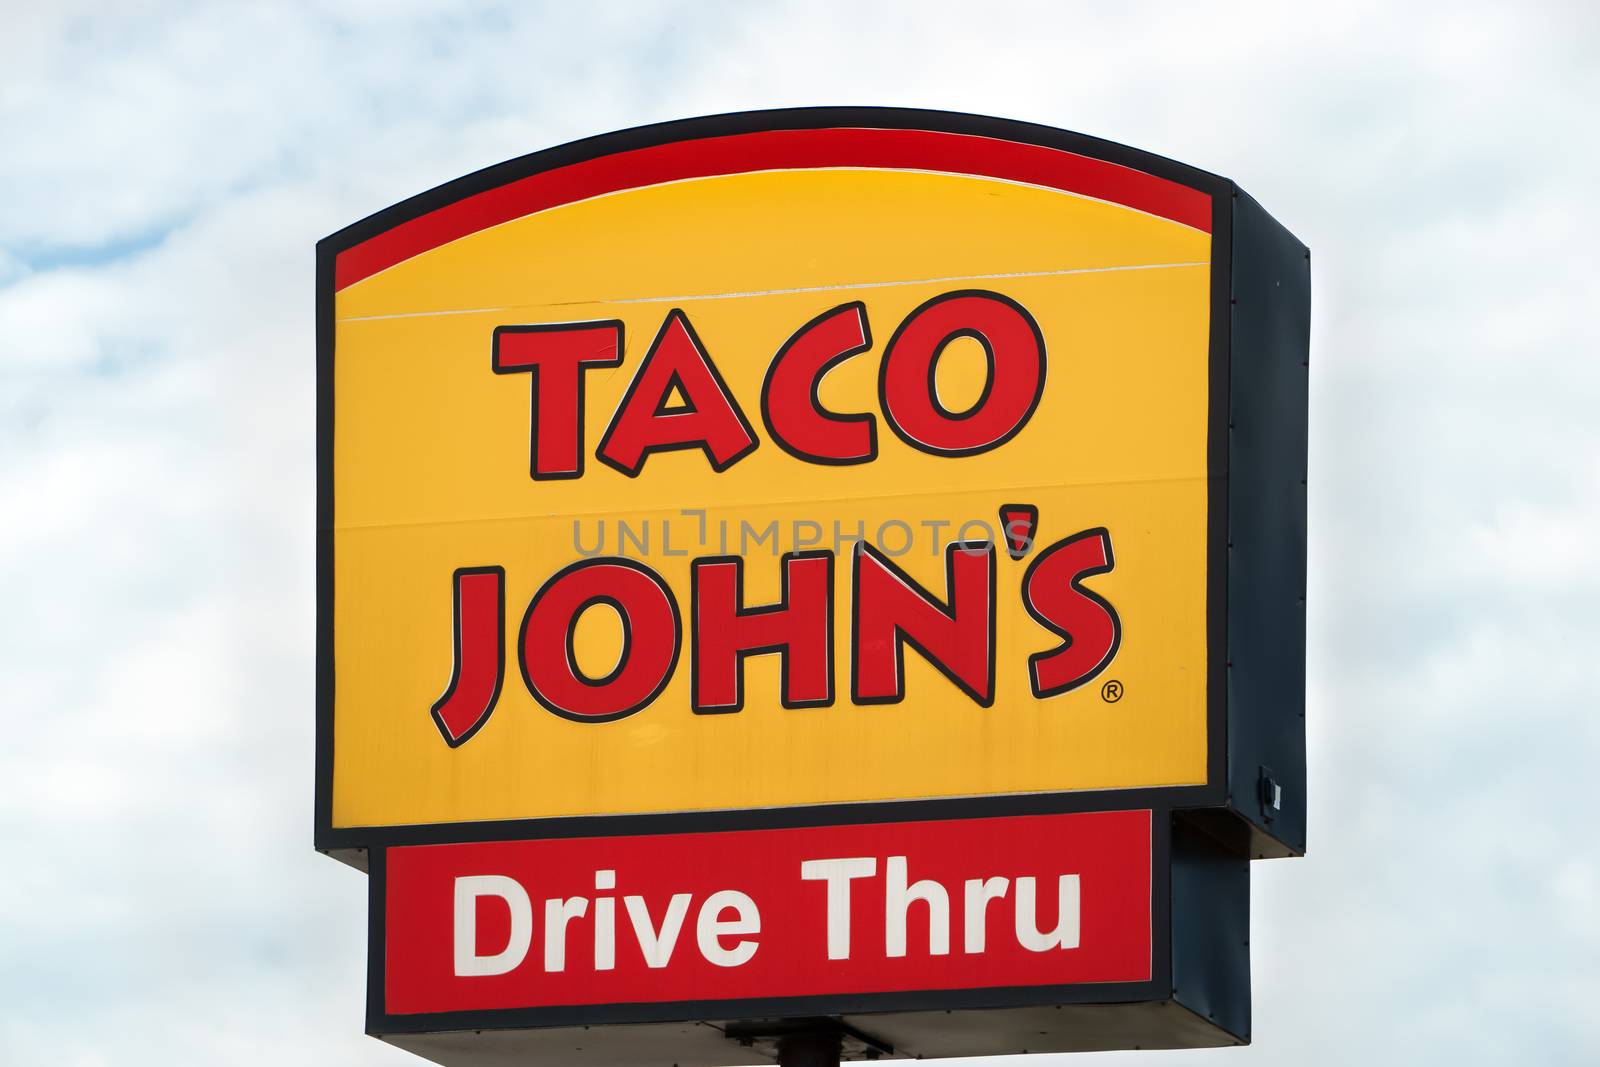 Taco John's Exterior and Sign by wolterk